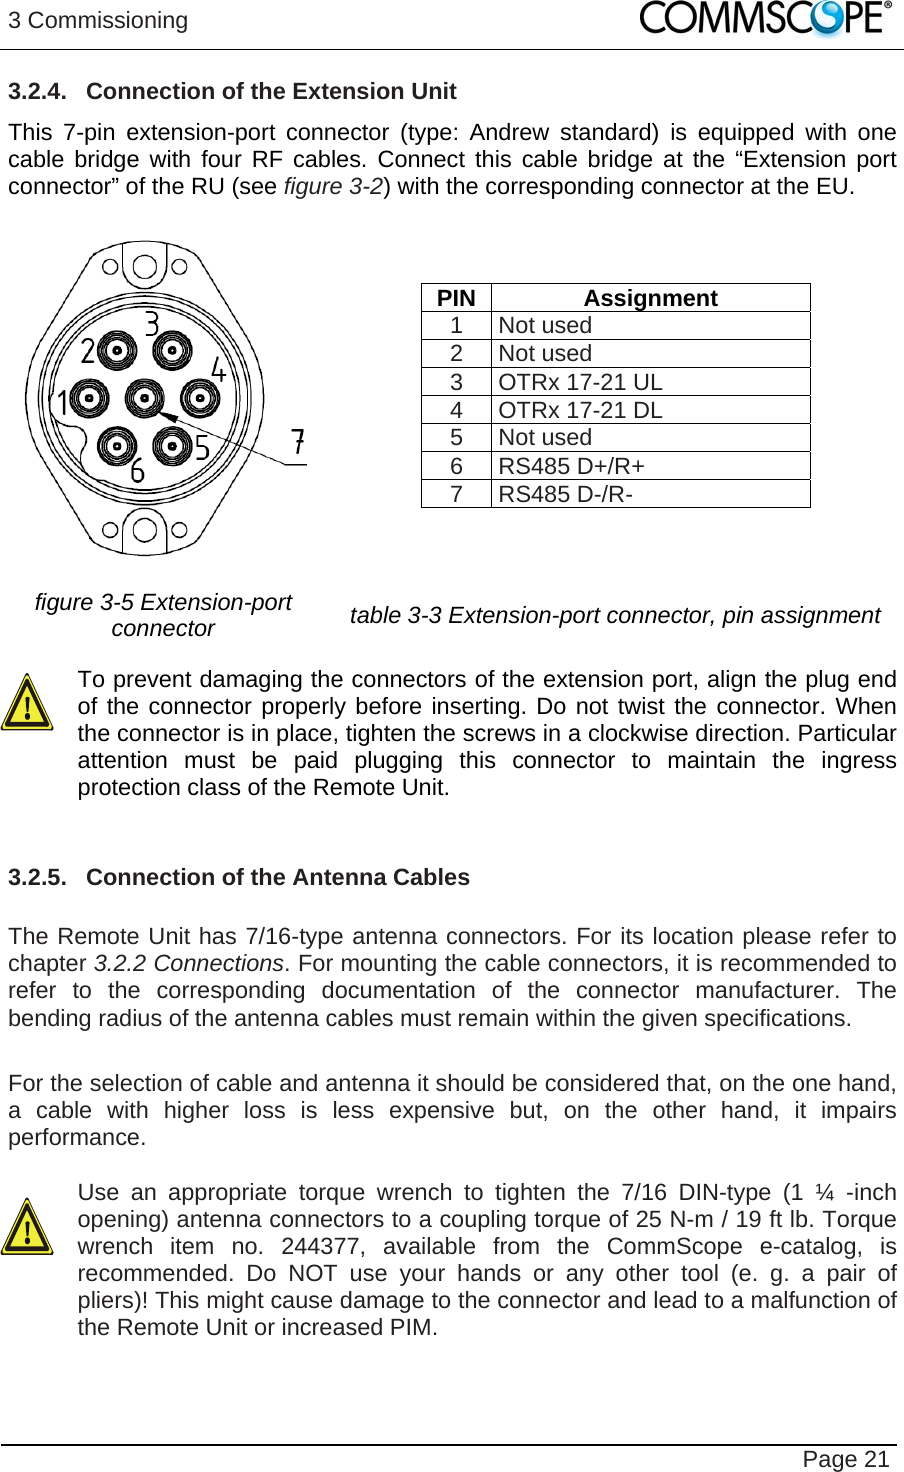 3 Commissioning   Page 21 3.2.4.  Connection of the Extension Unit This 7-pin extension-port connector (type: Andrew standard) is equipped with one cable bridge with four RF cables. Connect this cable bridge at the “Extension port connector” of the RU (see figure 3-2) with the corresponding connector at the EU.   PIN Assignment 1 Not used 2 Not used 3 OTRx 17-21 UL 4 OTRx 17-21 DL 5 Not used 6 RS485 D+/R+ 7 RS485 D-/R- figure 3-5 Extension-port connector   table 3-3 Extension-port connector, pin assignment  To prevent damaging the connectors of the extension port, align the plug end of the connector properly before inserting. Do not twist the connector. When the connector is in place, tighten the screws in a clockwise direction. Particular attention must be paid plugging this connector to maintain the ingress protection class of the Remote Unit.   3.2.5.  Connection of the Antenna Cables  The Remote Unit has 7/16-type antenna connectors. For its location please refer to chapter 3.2.2 Connections. For mounting the cable connectors, it is recommended to refer to the corresponding documentation of the connector manufacturer. The bending radius of the antenna cables must remain within the given specifications.  For the selection of cable and antenna it should be considered that, on the one hand, a cable with higher loss is less expensive but, on the other hand, it impairs performance.   Use an appropriate torque wrench to tighten the 7/16 DIN-type (1 ¼ -inch opening) antenna connectors to a coupling torque of 25 N-m / 19 ft lb. Torque wrench item no. 244377, available from the CommScope e-catalog, is recommended. Do NOT use your hands or any other tool (e. g. a pair of pliers)! This might cause damage to the connector and lead to a malfunction of the Remote Unit or increased PIM.   